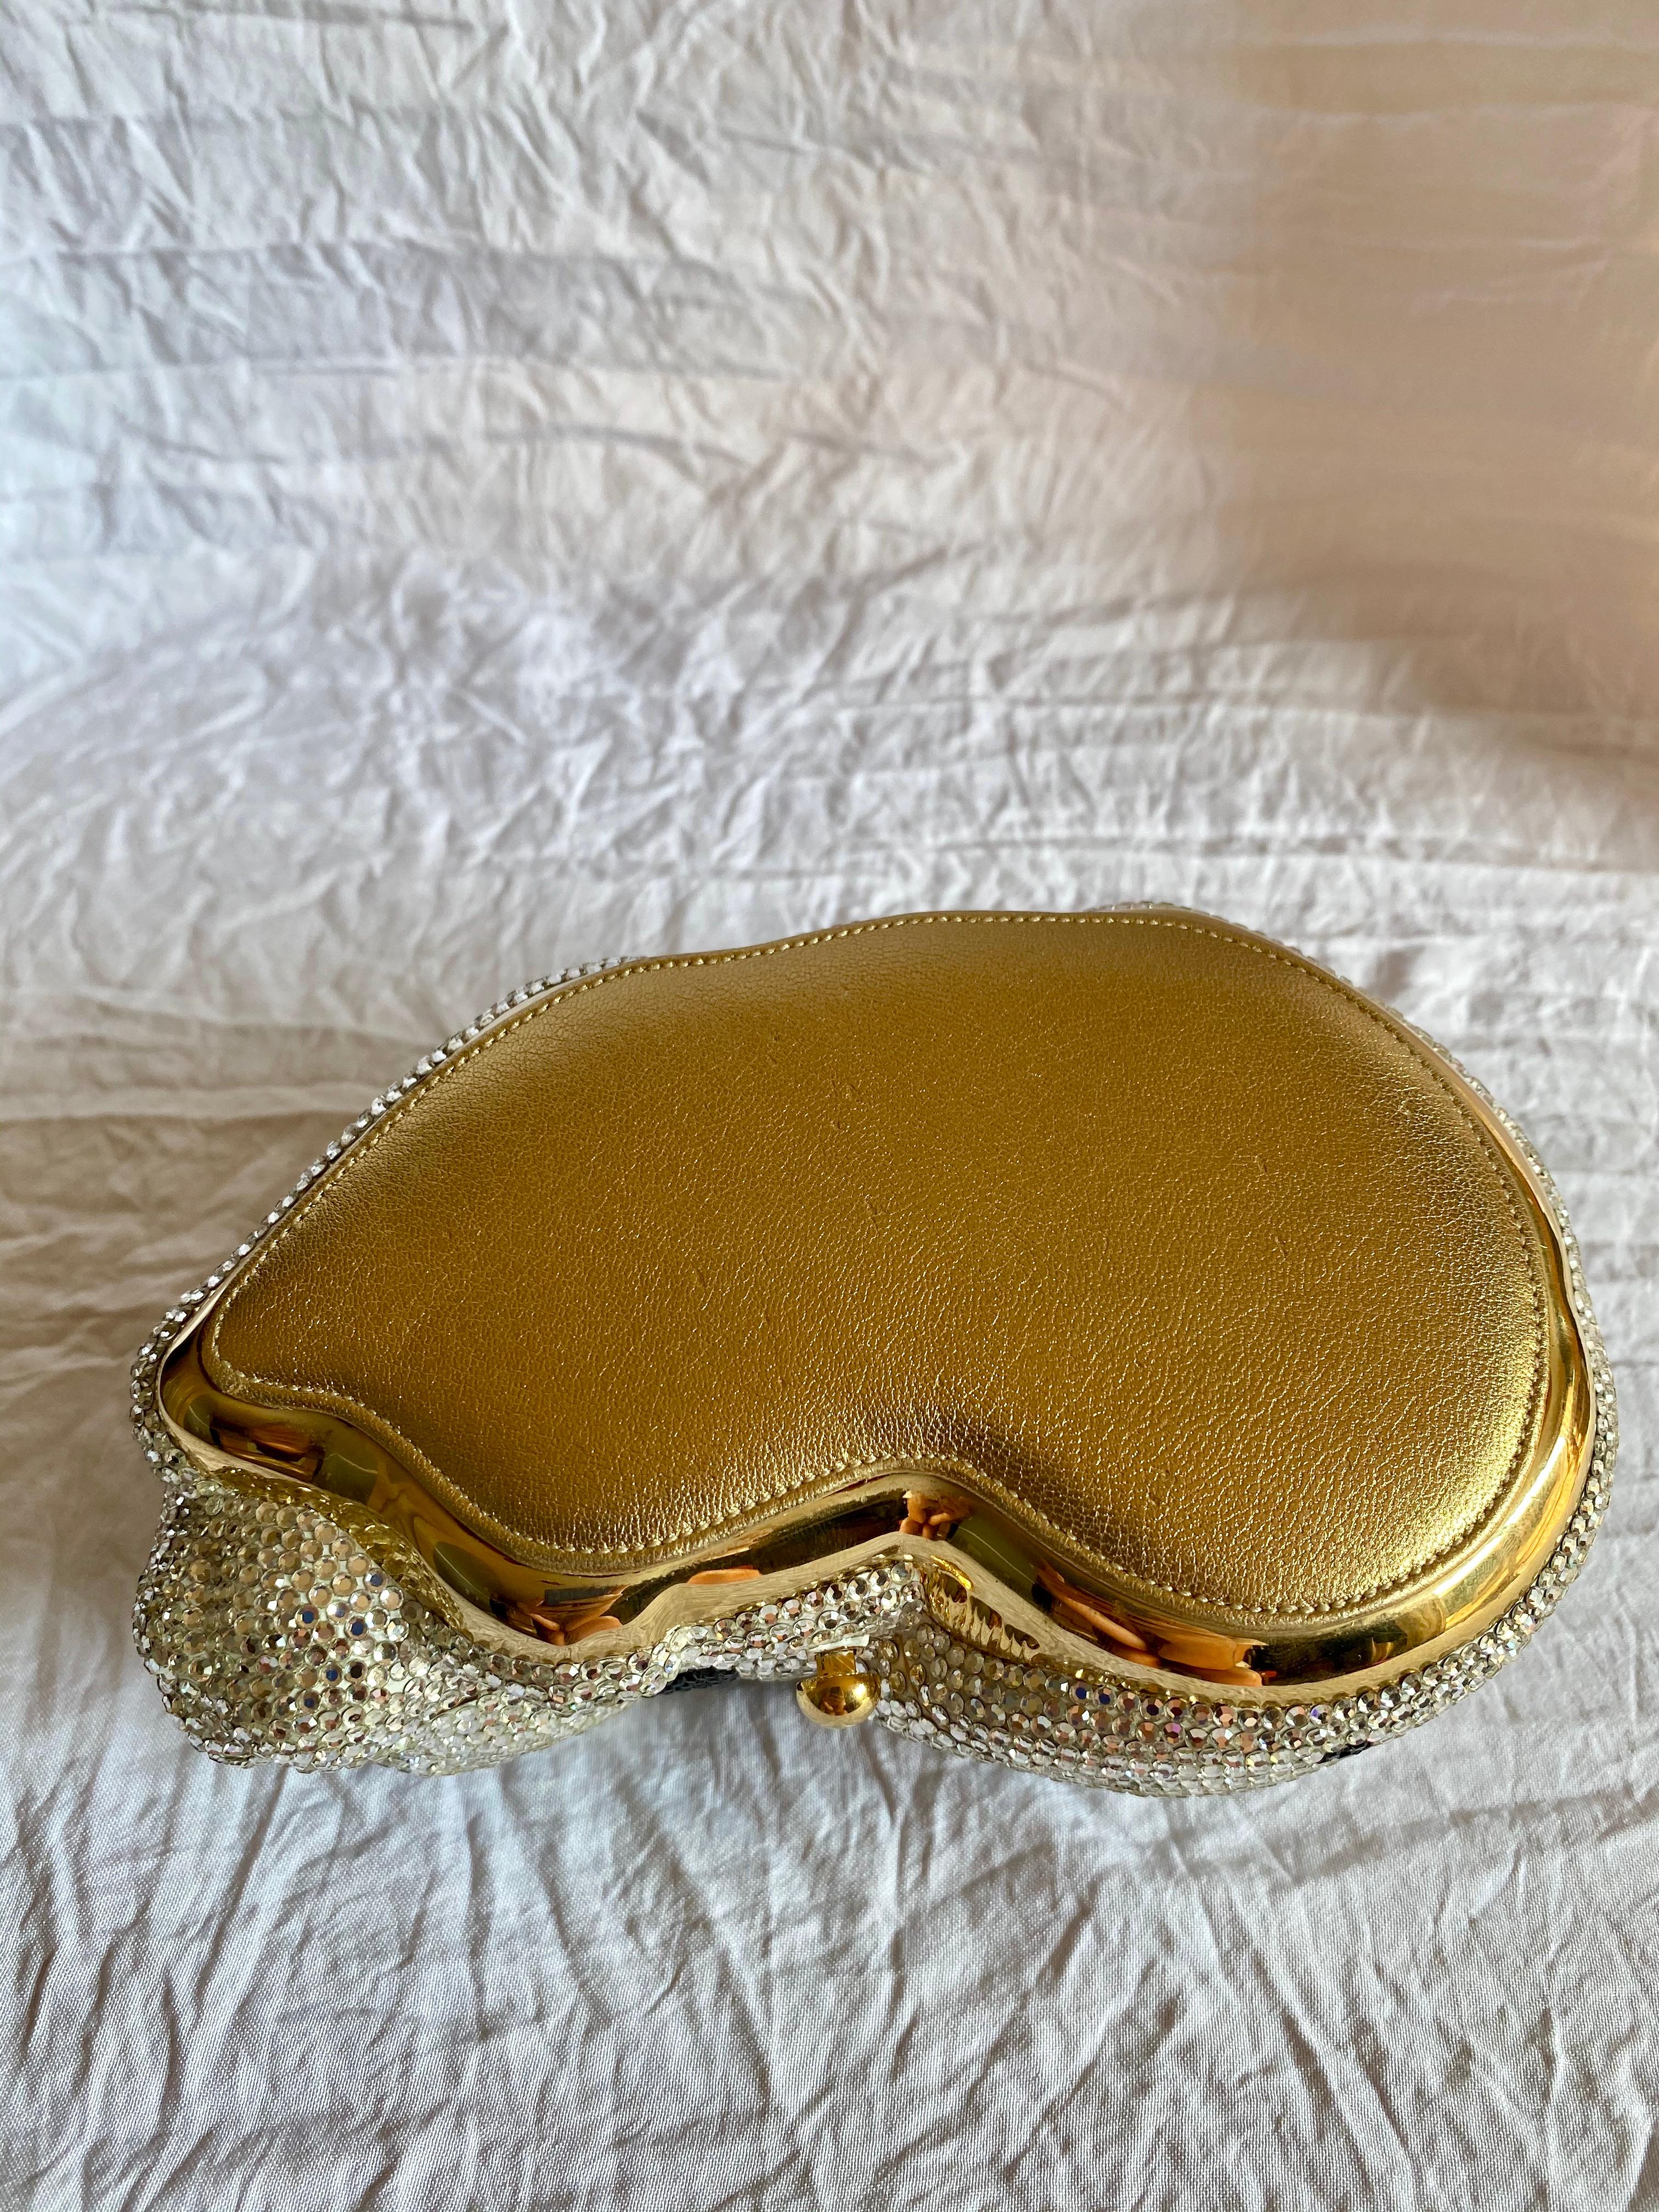 Judith Leiber Spotted Sleeping Cat Minaudière In Good Condition For Sale In Annapolis, MD